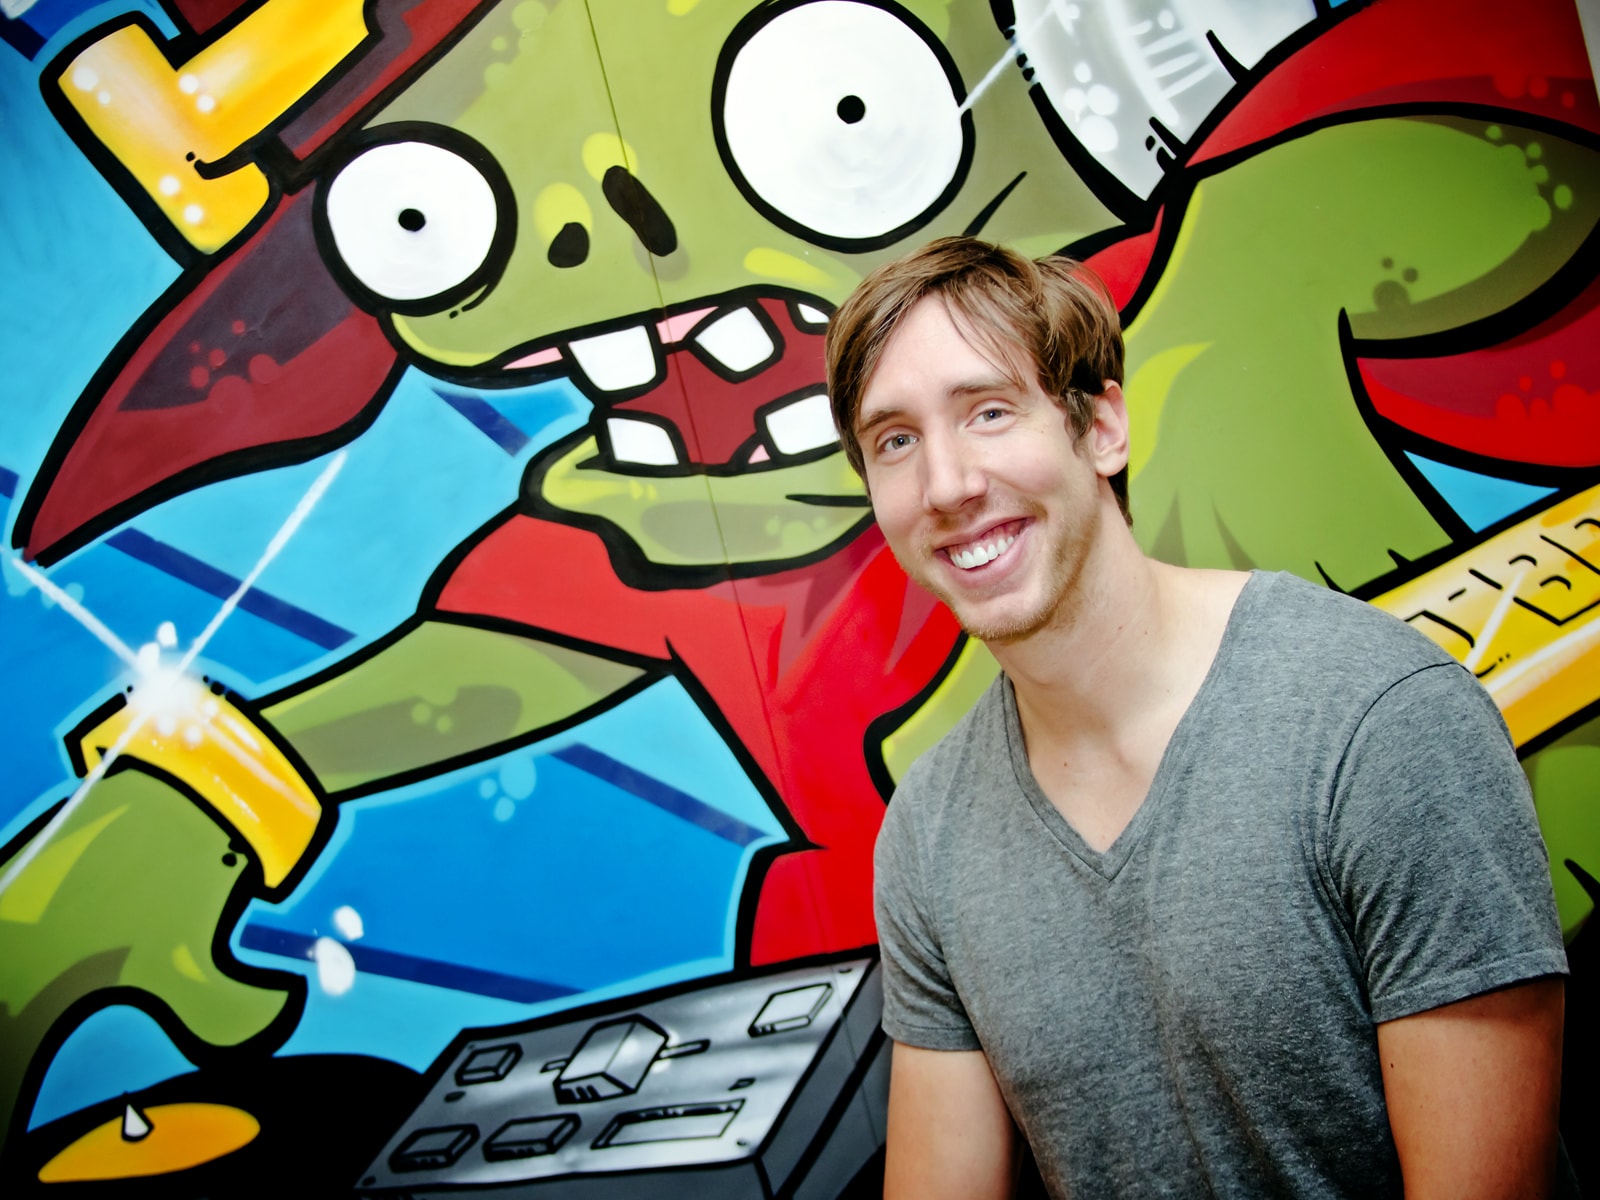 DigiPen BFA alumnus Mark Barrett smiling in front of large grafffiti-style wall painting of a zombie at PopCap's office